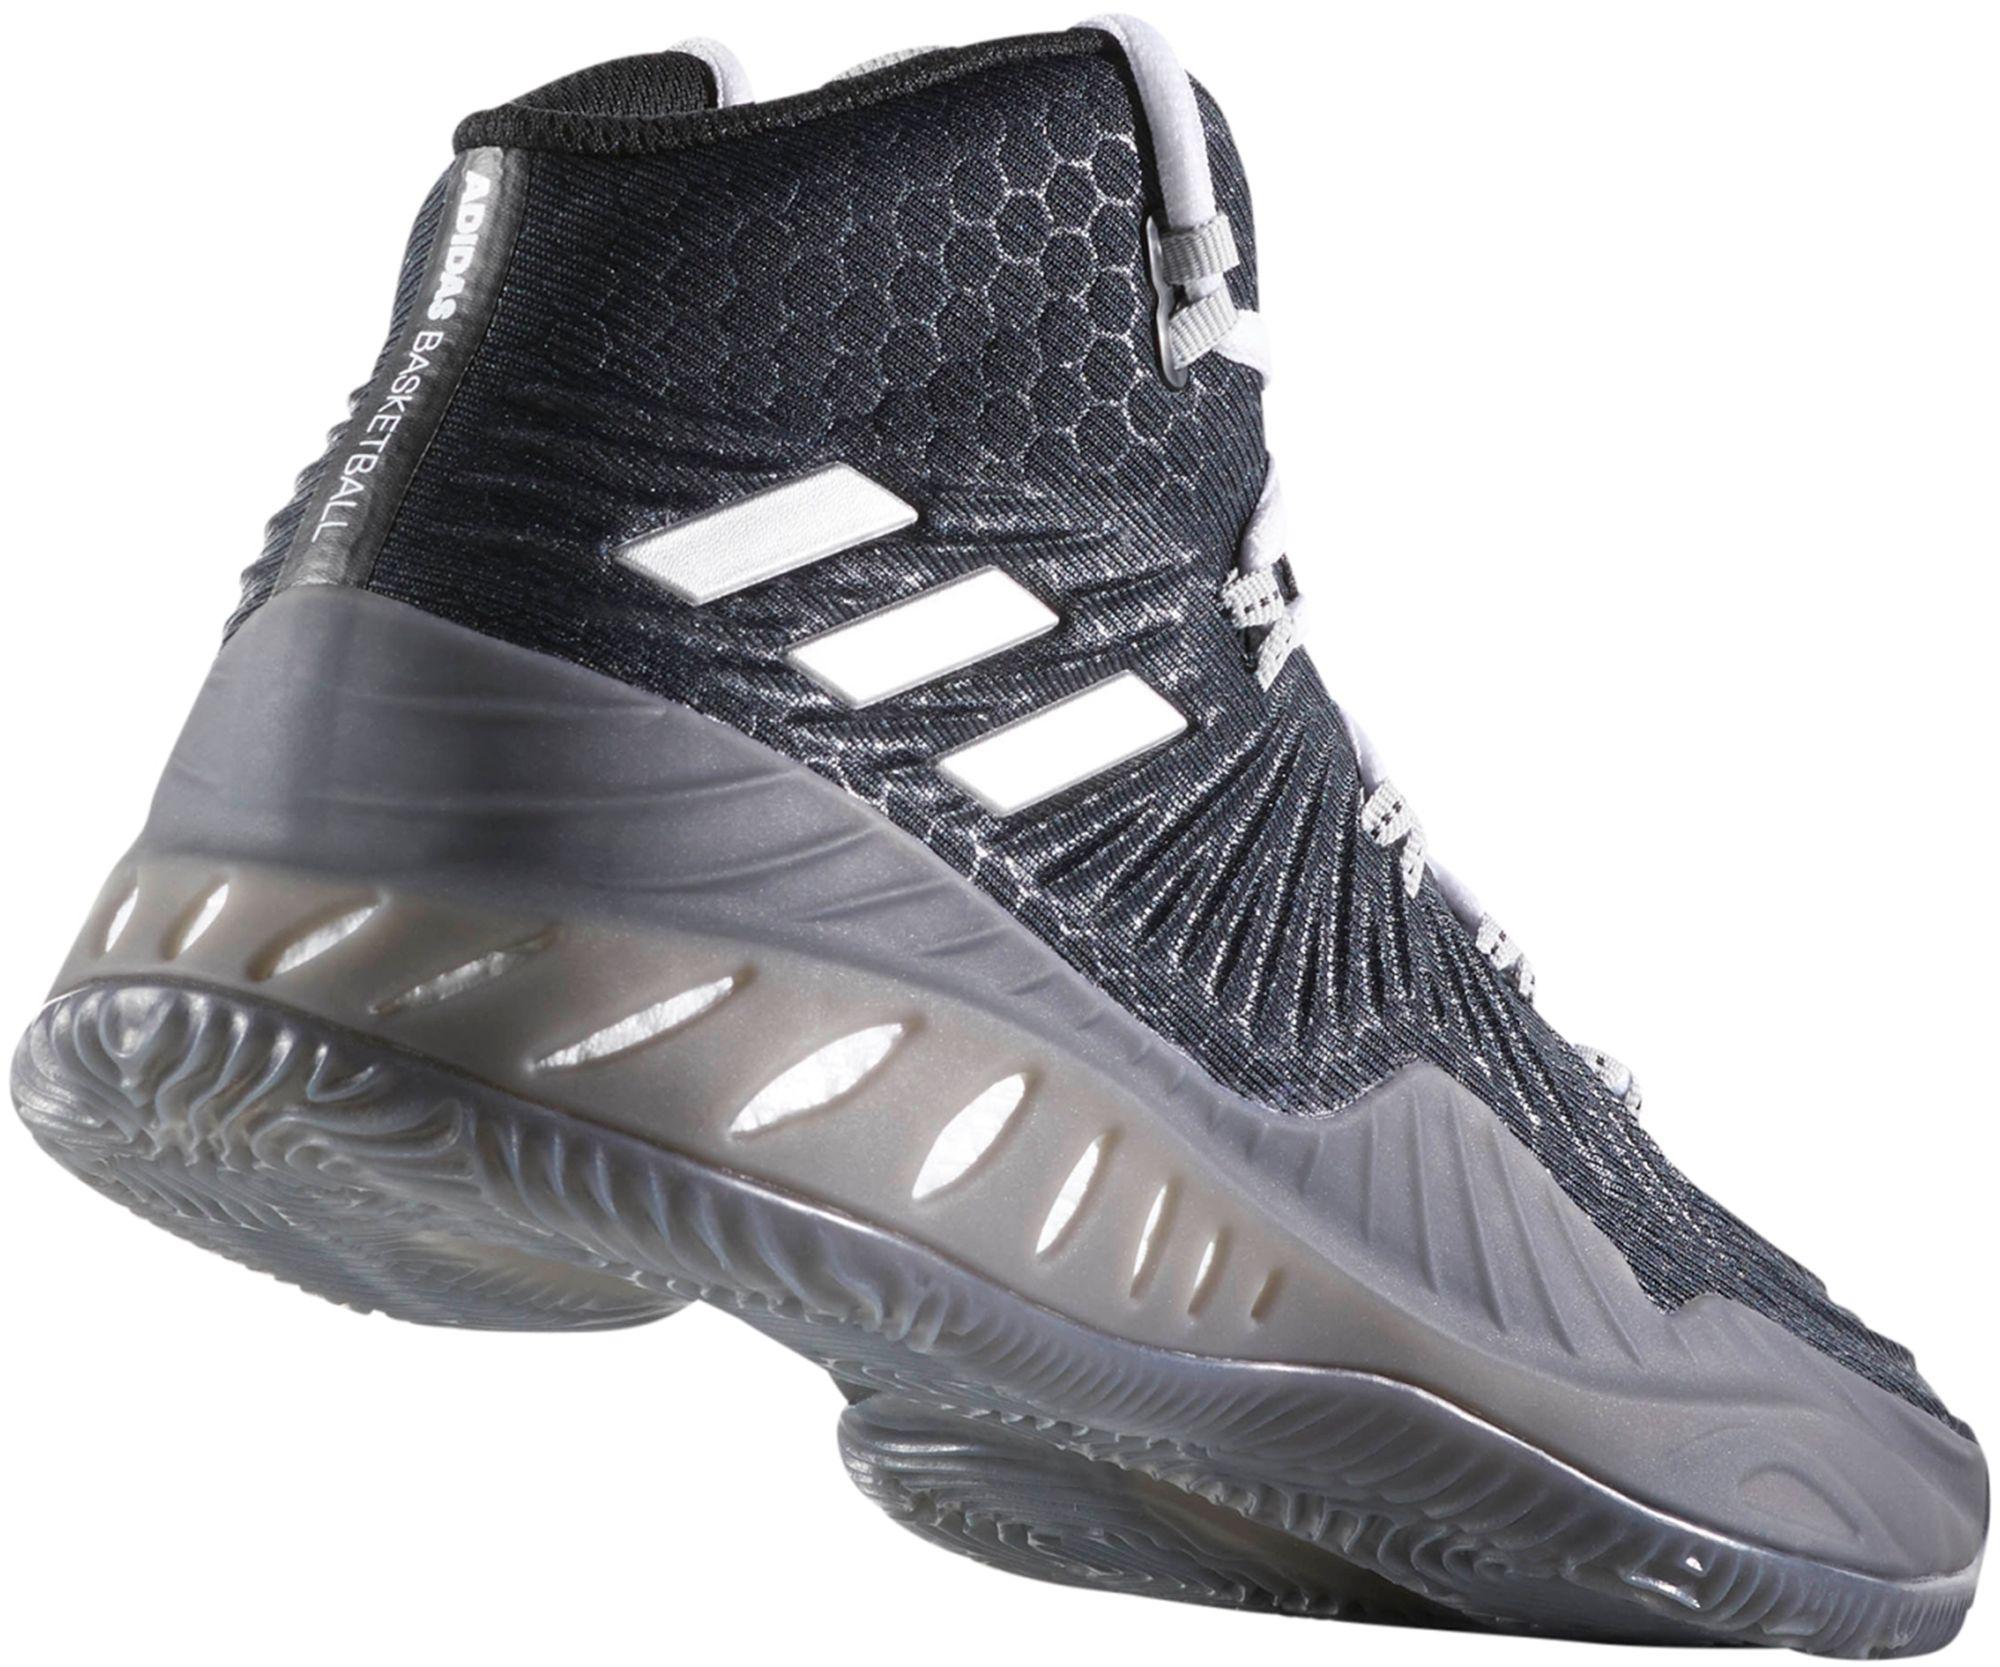 72 Limited Edition Crazy explosive adidas shoes for Trend in 2022